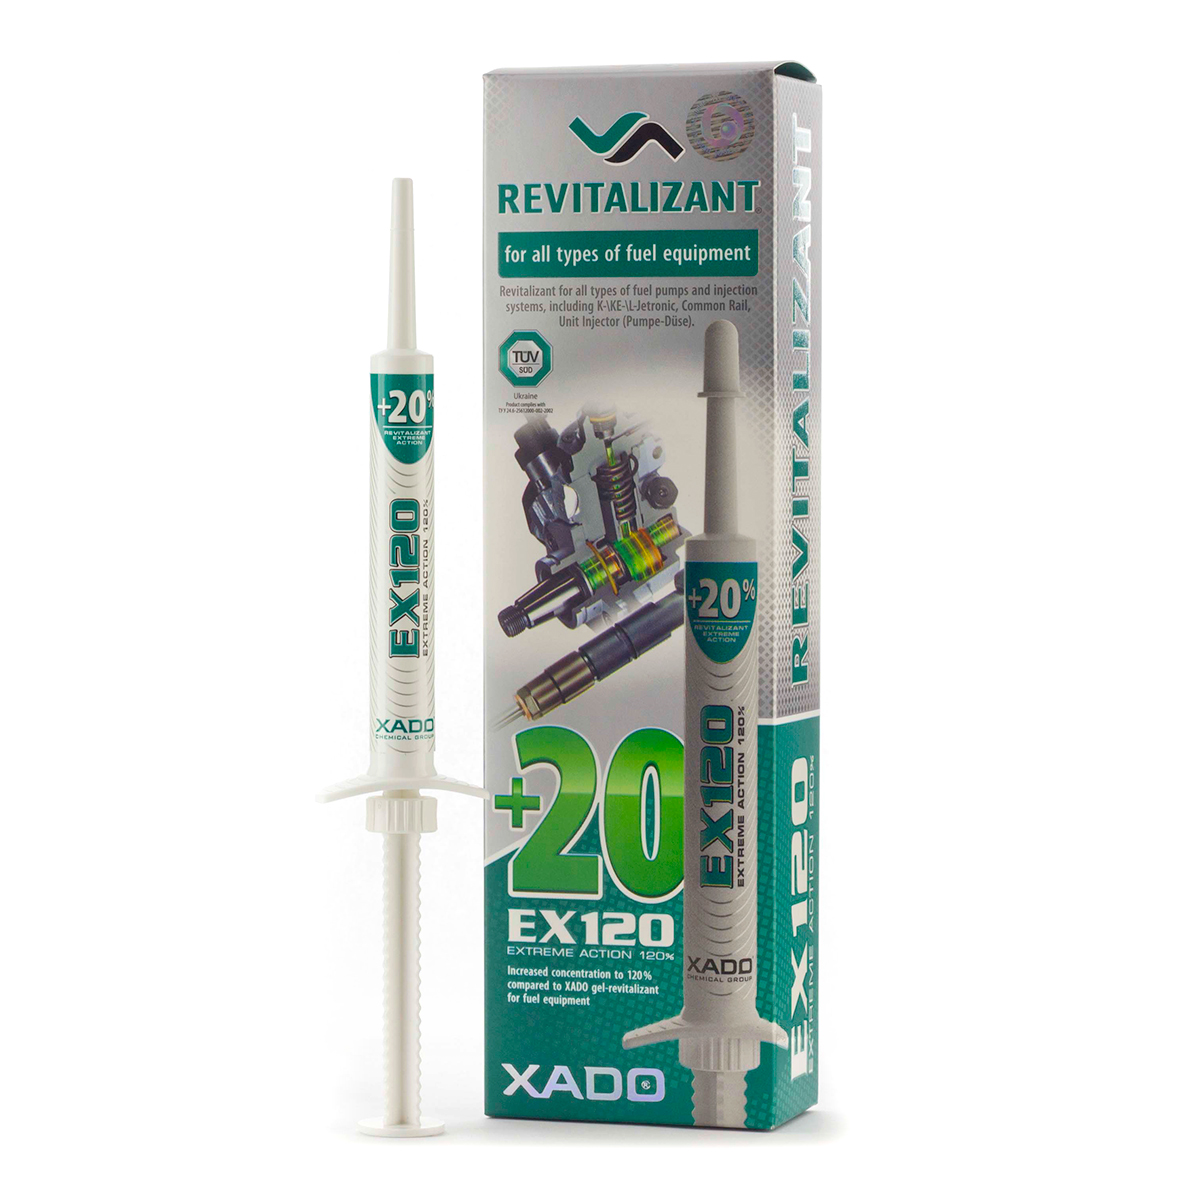 XADO<br>REVITALIZANT <br>EX120 for all types of fuel equipment and fuel injection systems<br>燃料システム用保護添加剤(ガソリン、軽油、LPG他燃料用)